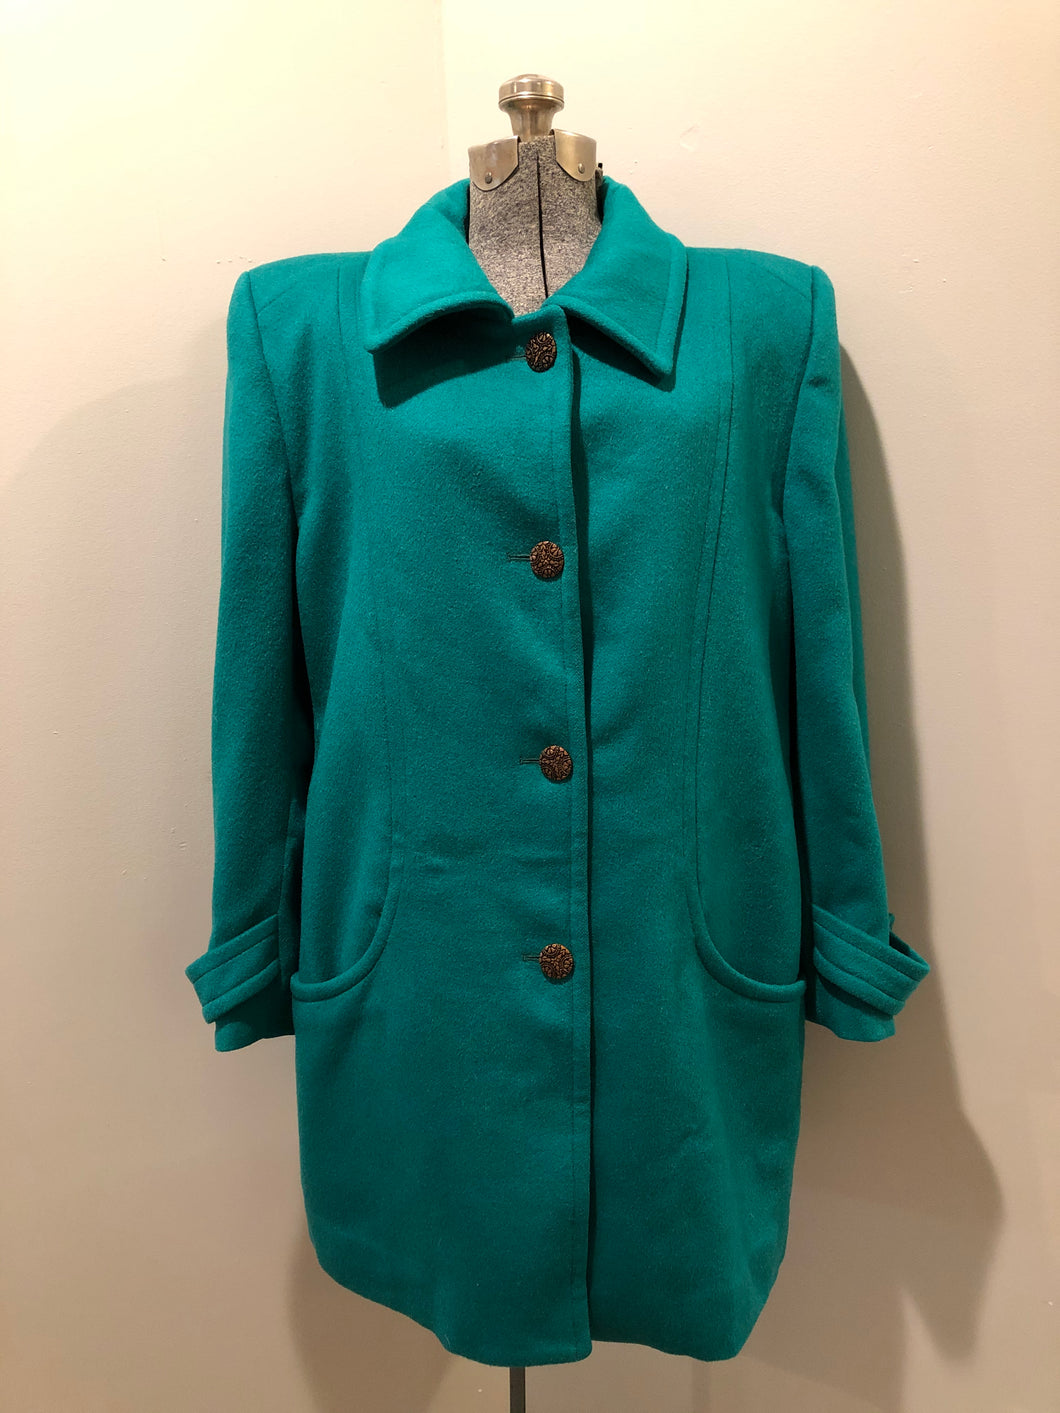 Kingspier Vintage - London Fog teal green 100% wool car coat with large filigree button closures and patch pockets. Size large.

